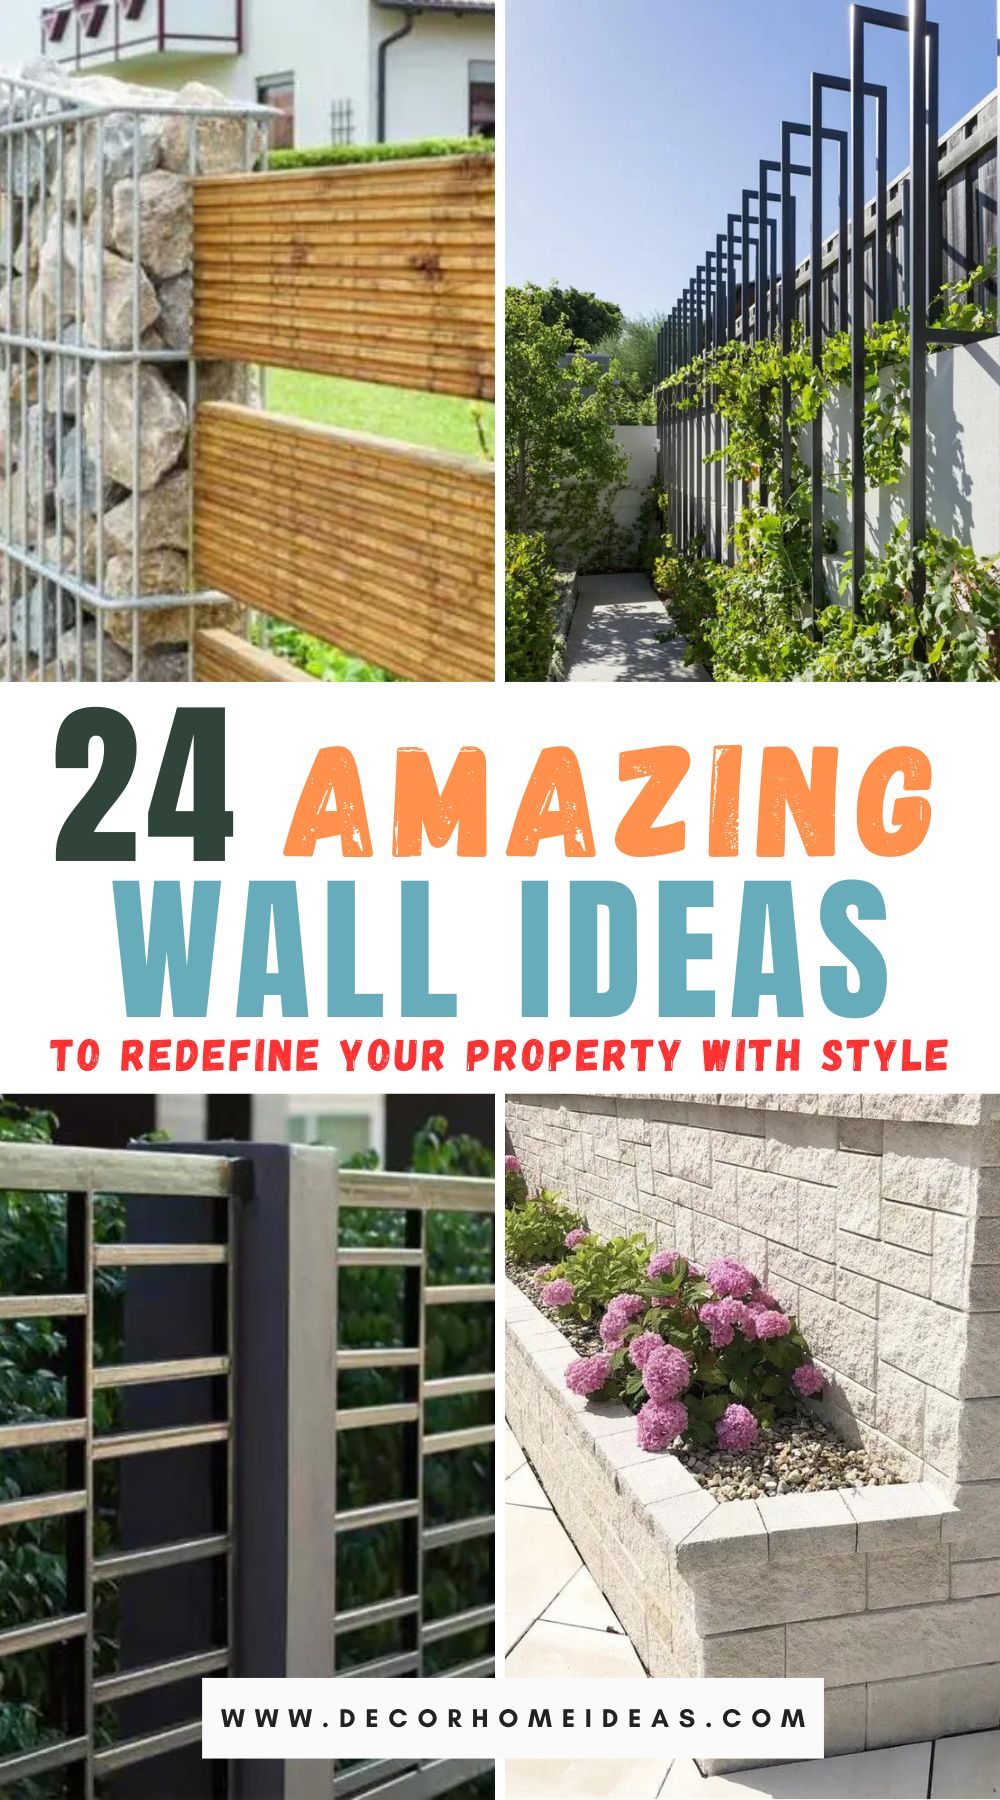 Transform your property with 24 unique wall ideas. Give your walls a fresh look with a variety of styles and designs.